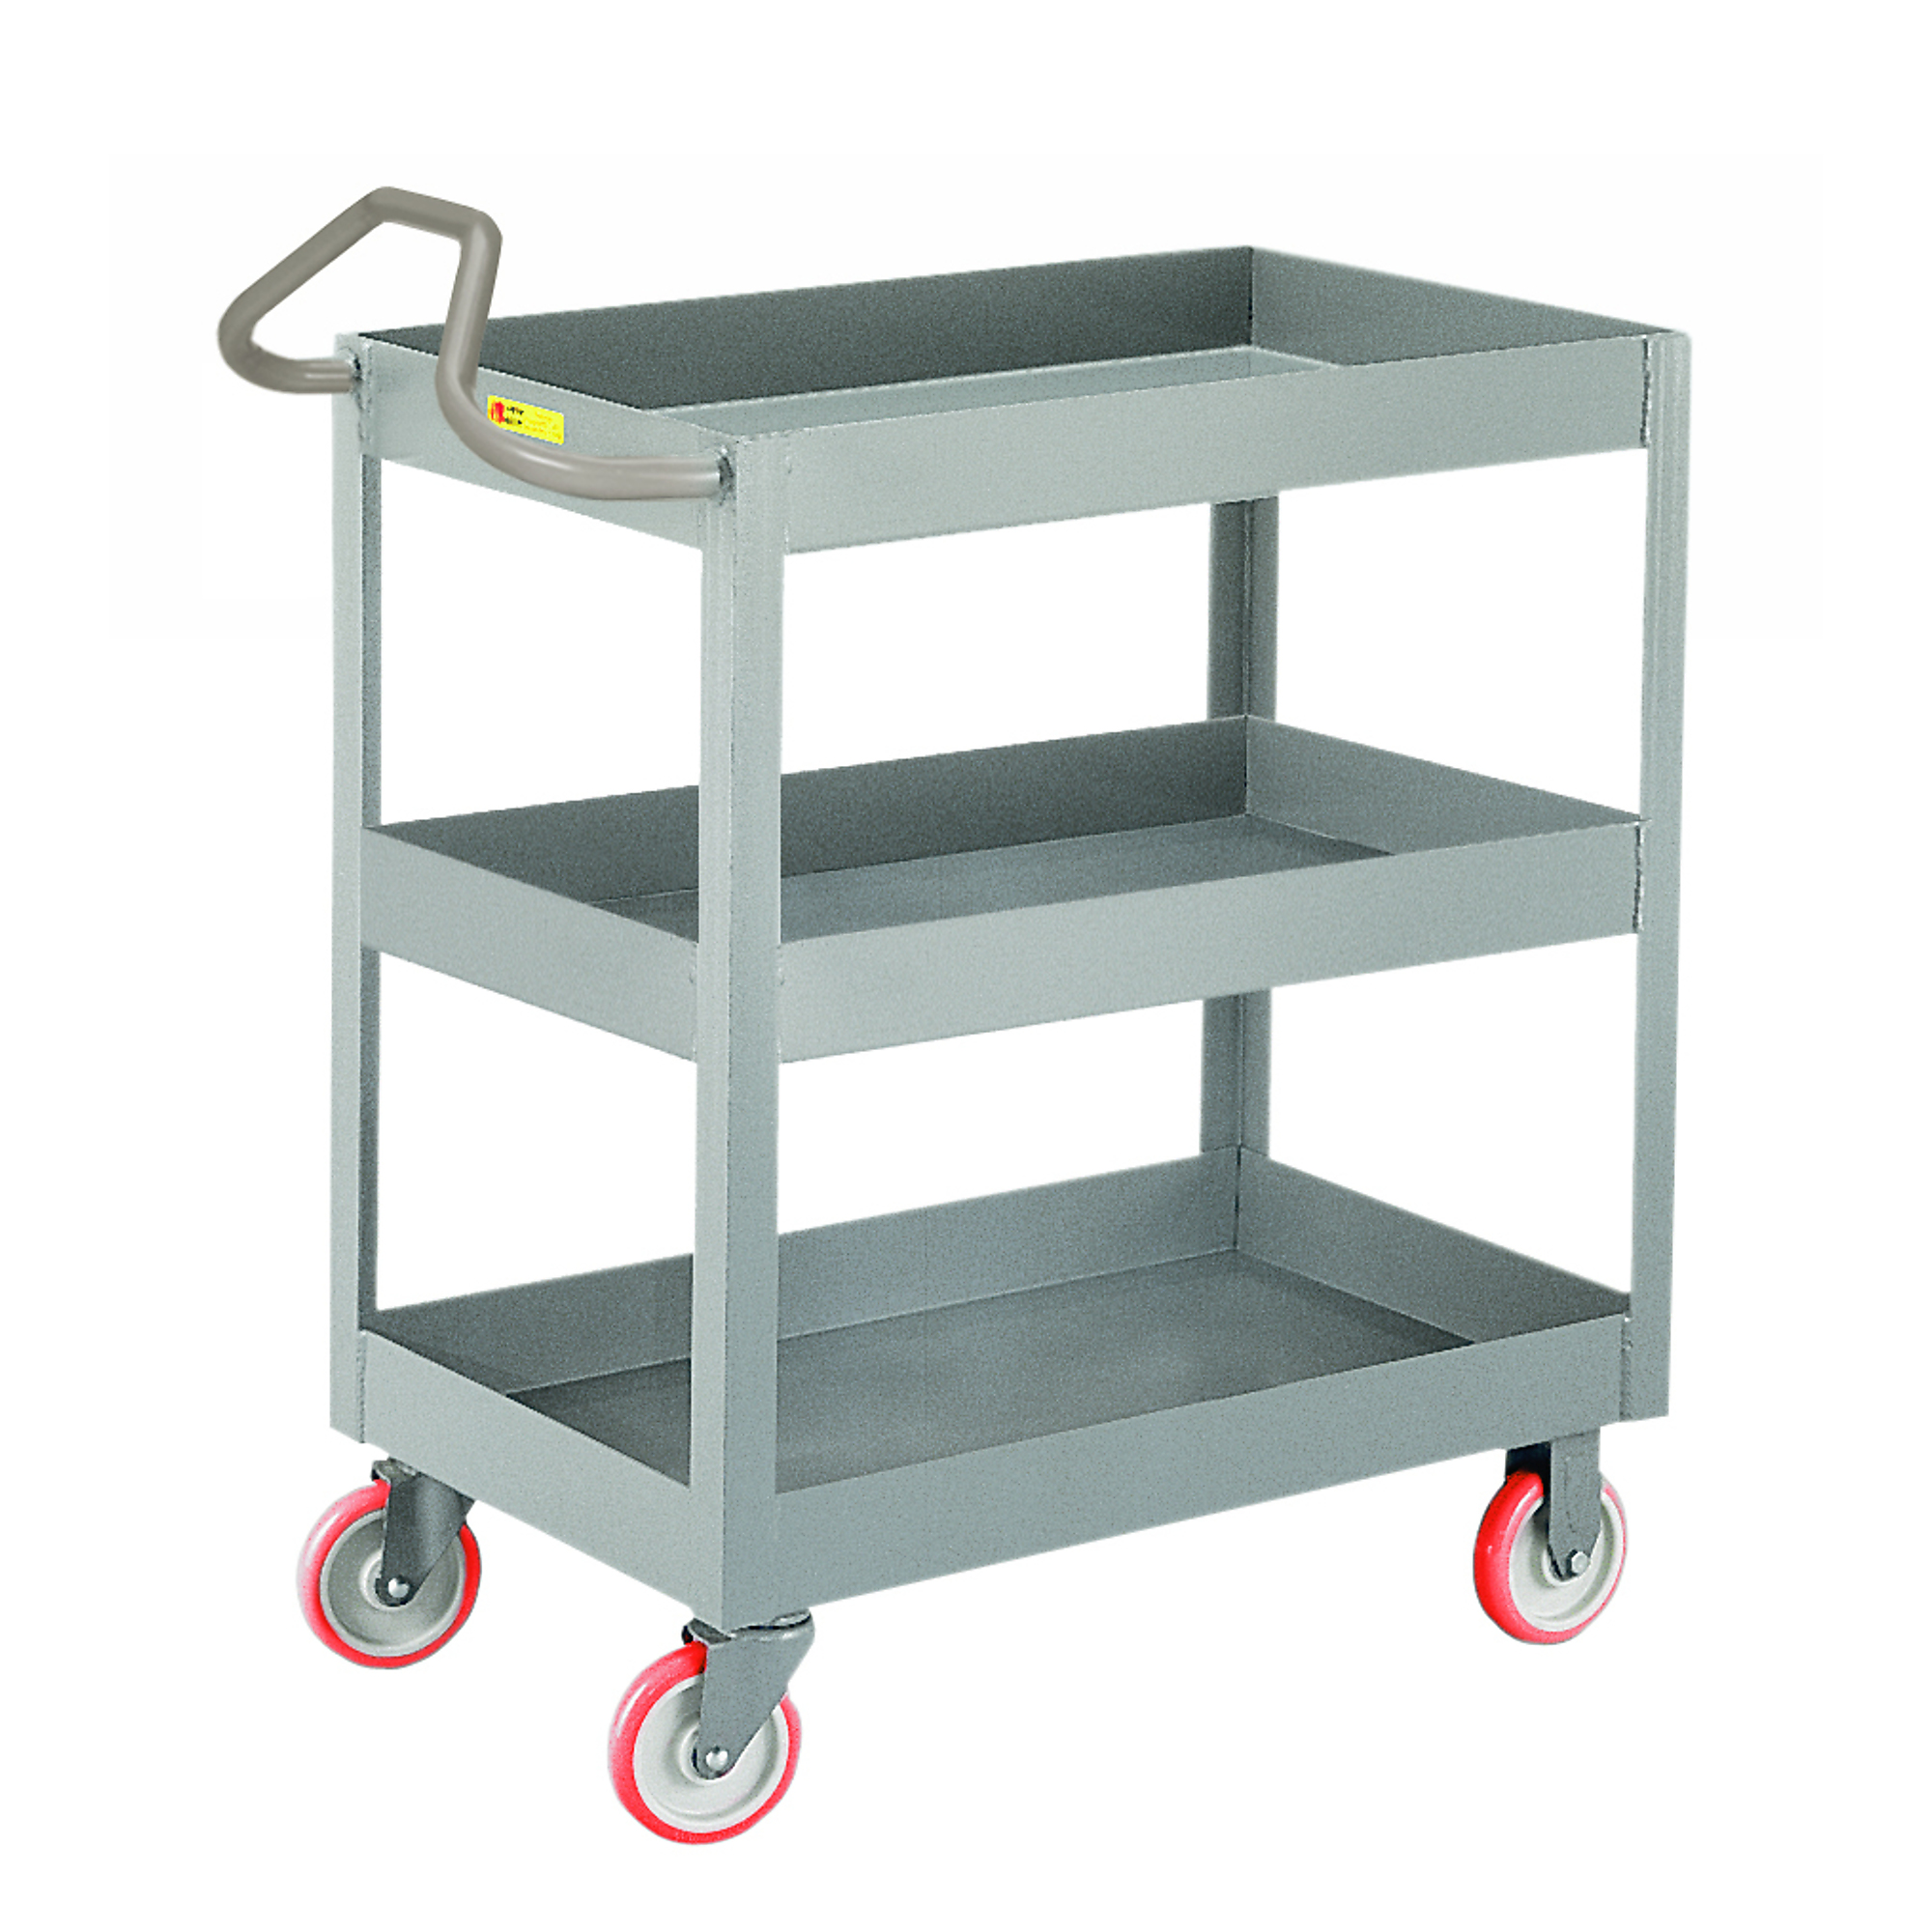 Little Giant, 3Inch Deep Shelf Truck, Ergo Handle, 24x48, 1200 lbs, Total Capacity 1200 lb, Shelves (qty.) 3, Material Carbon Steel, Model 3ENDS2448X3